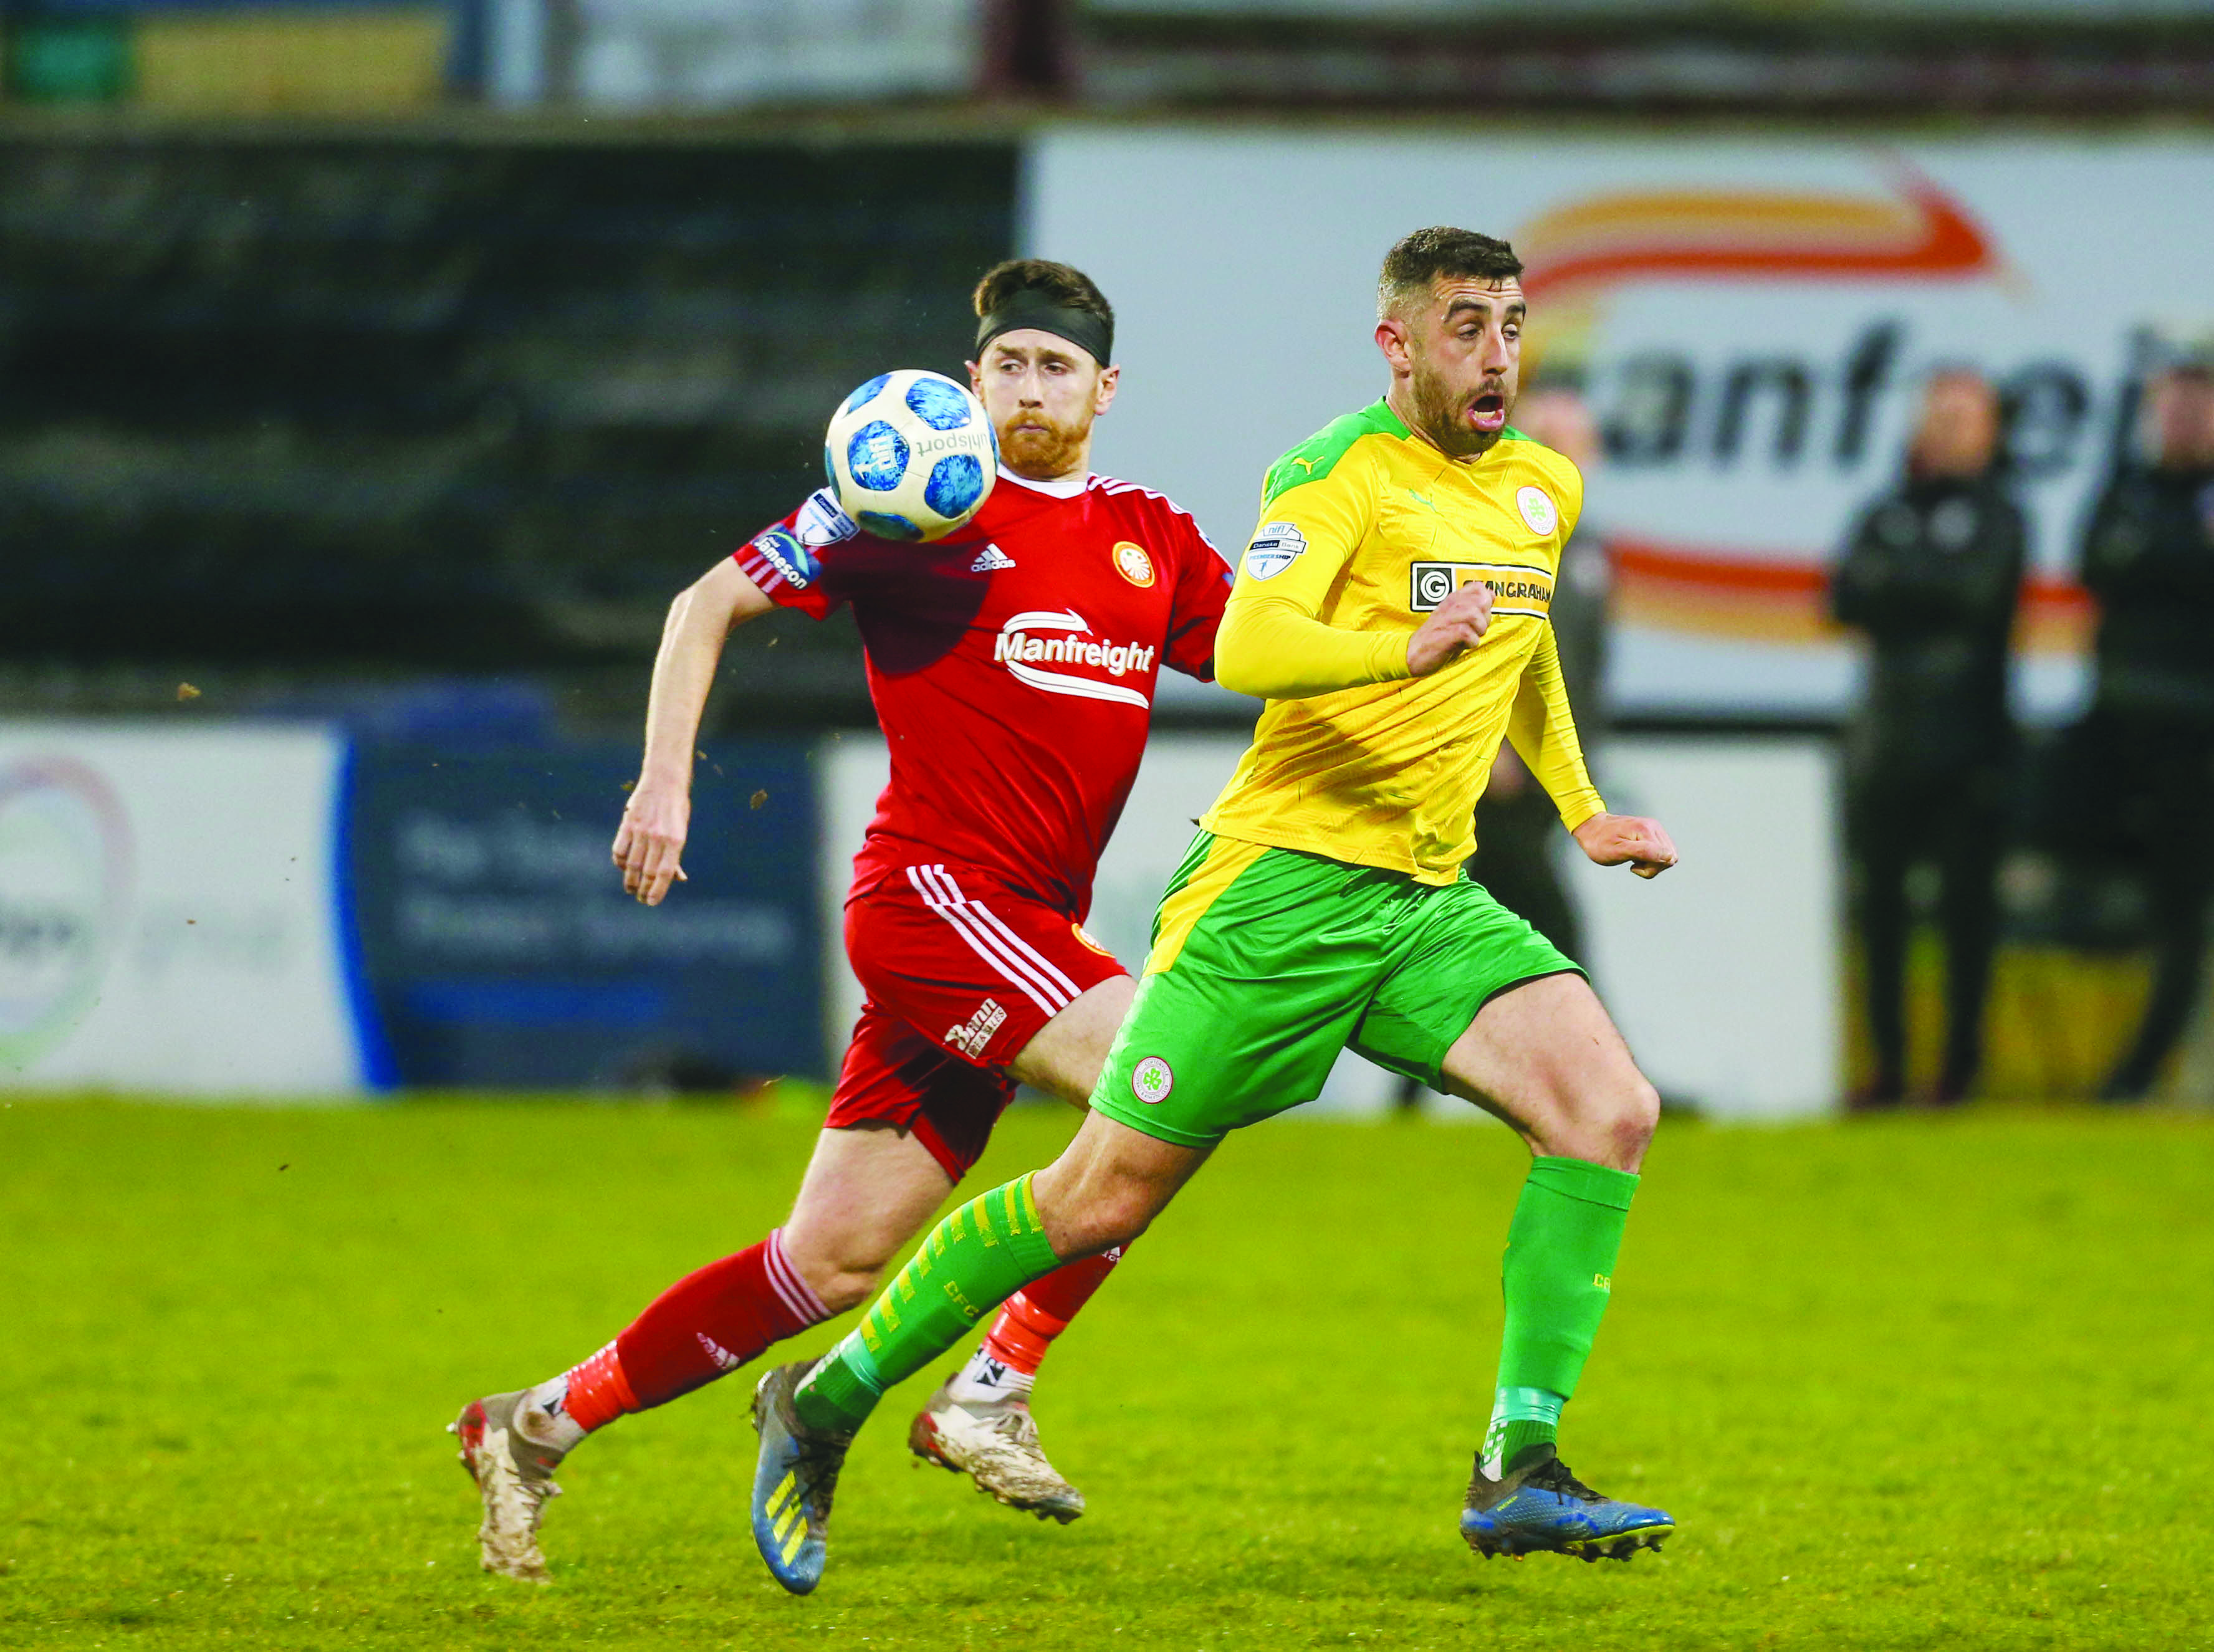 Joe Gormley has hit top form for Cliftonville just at the right time in the season according to manager Paddy McLaughlin